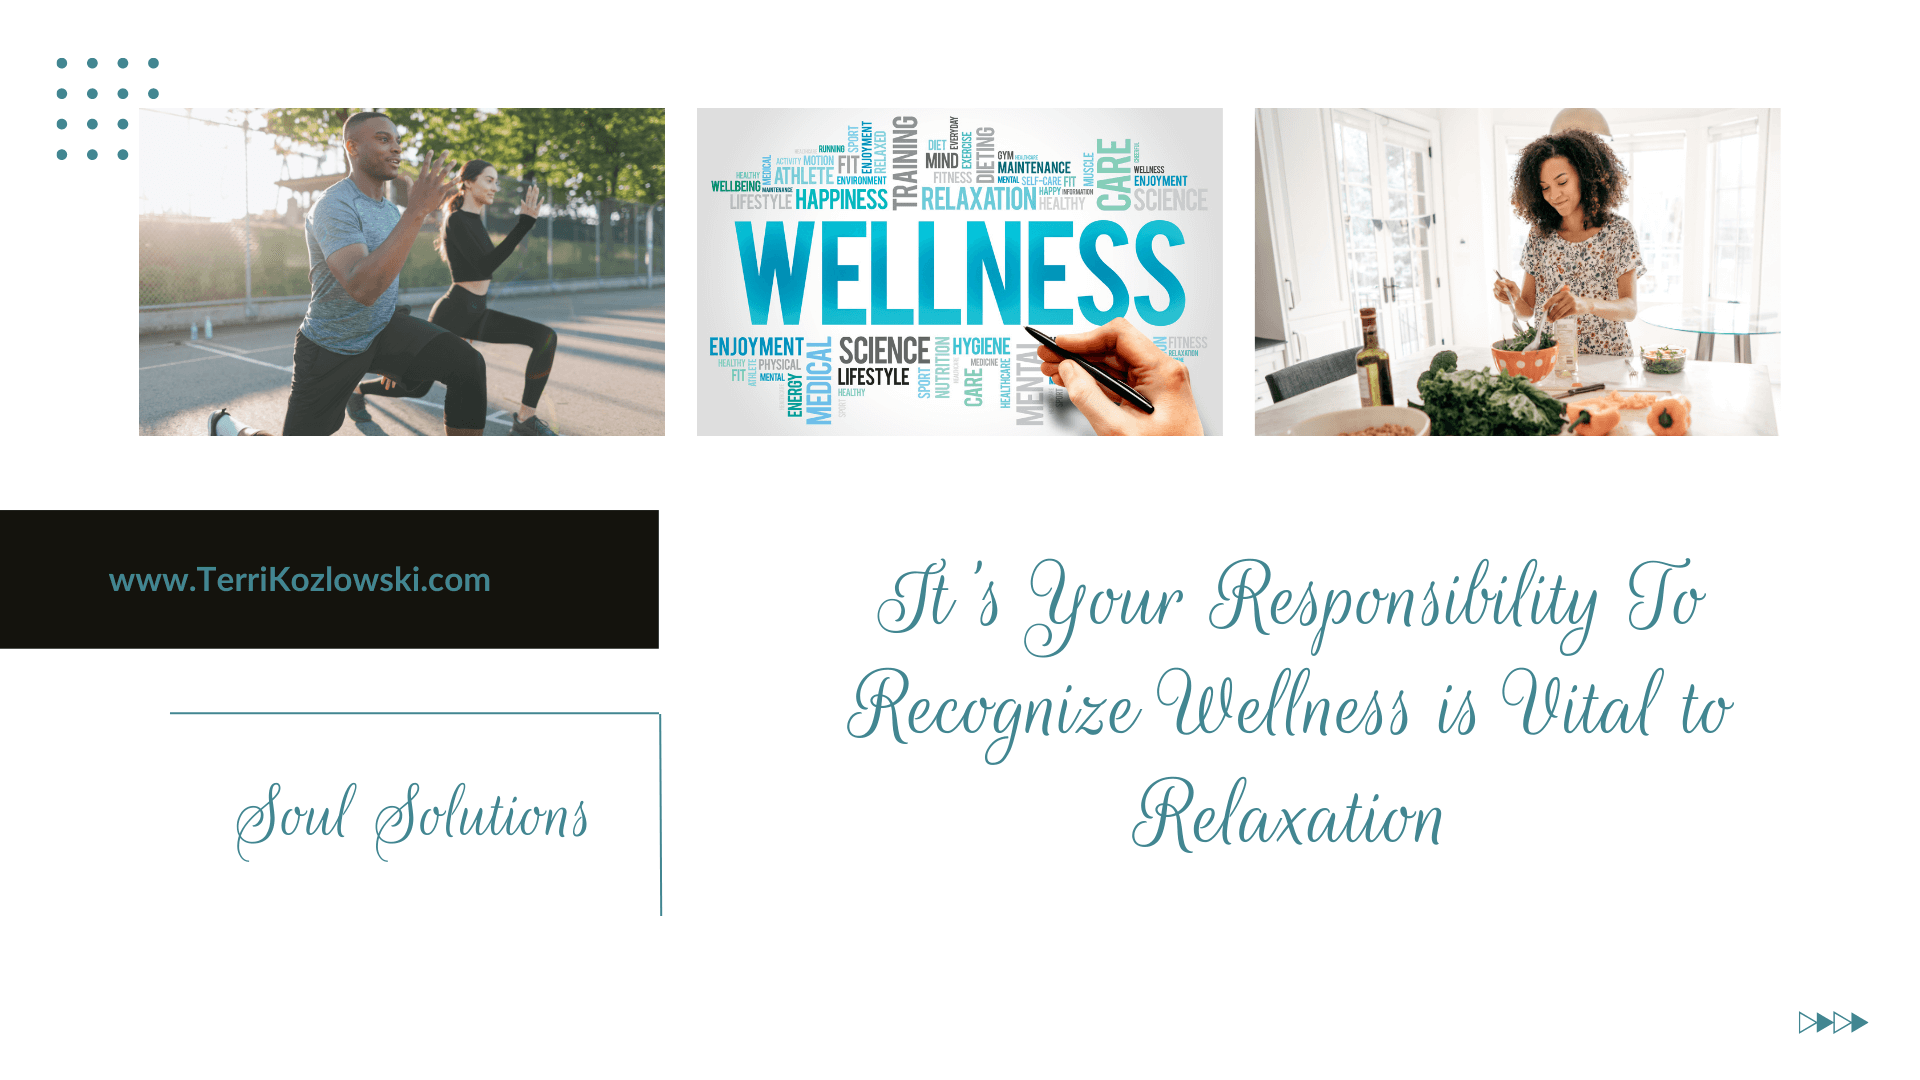 It's Your Responsibility To Recognize Wellness is Vital to Relaxation